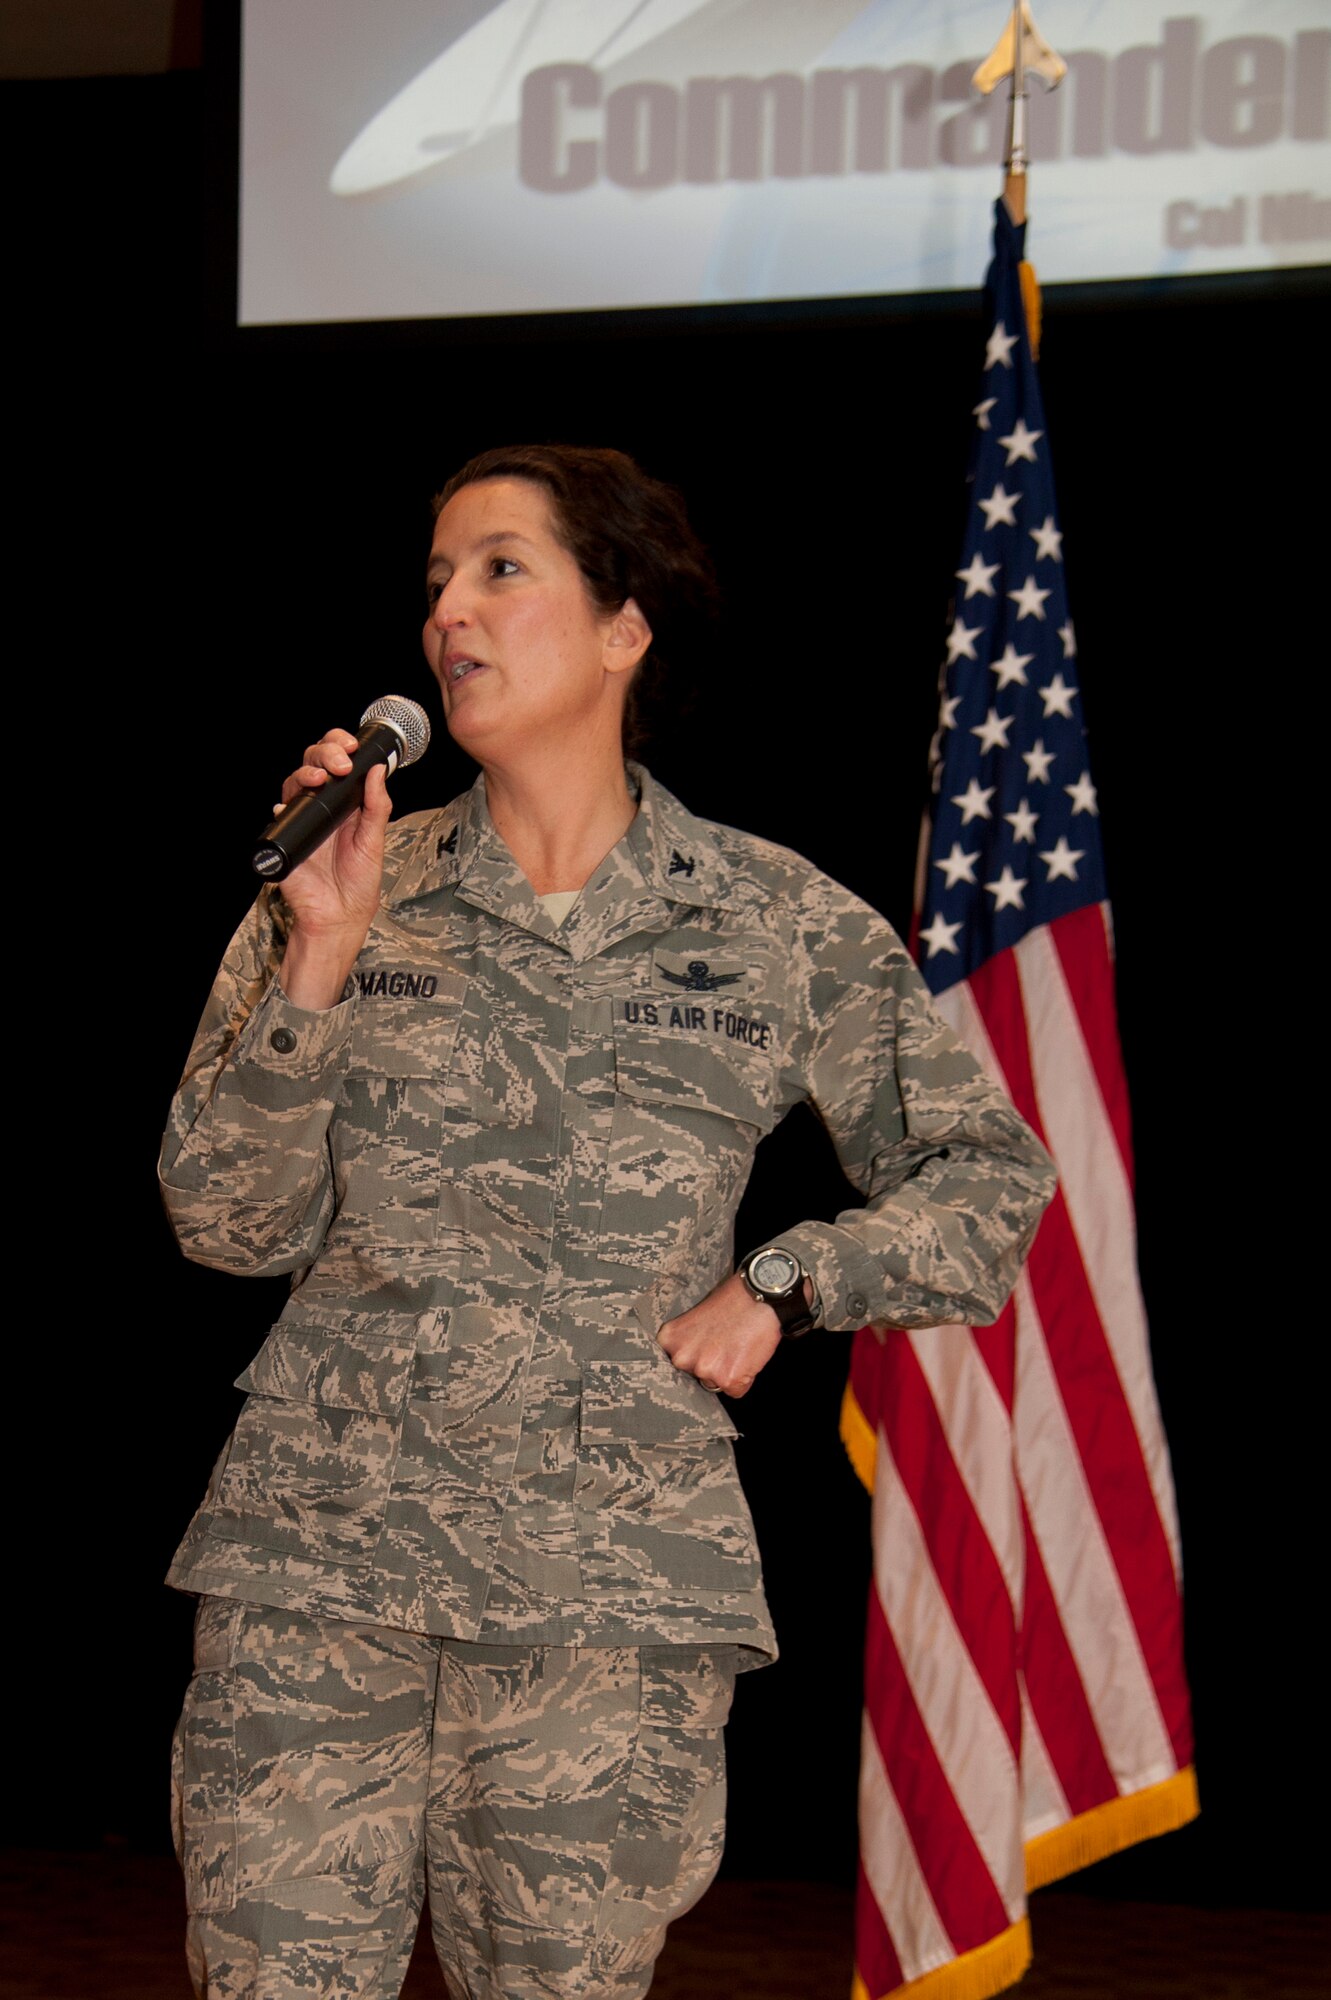 VANDENBEG AIR FORCE BASE, Calif. - Col. Nina Armagno, 30th Space Wing
commander, speaks during the commander's call at the Pacific Coast Club here
Friday, Jan. 18, 2013. The commander's call turned into a pep-rally for the
upcoming unit compliance inspection soon to begin. (U.S. Air Force
photo/Senior Airman Lael Huss)
